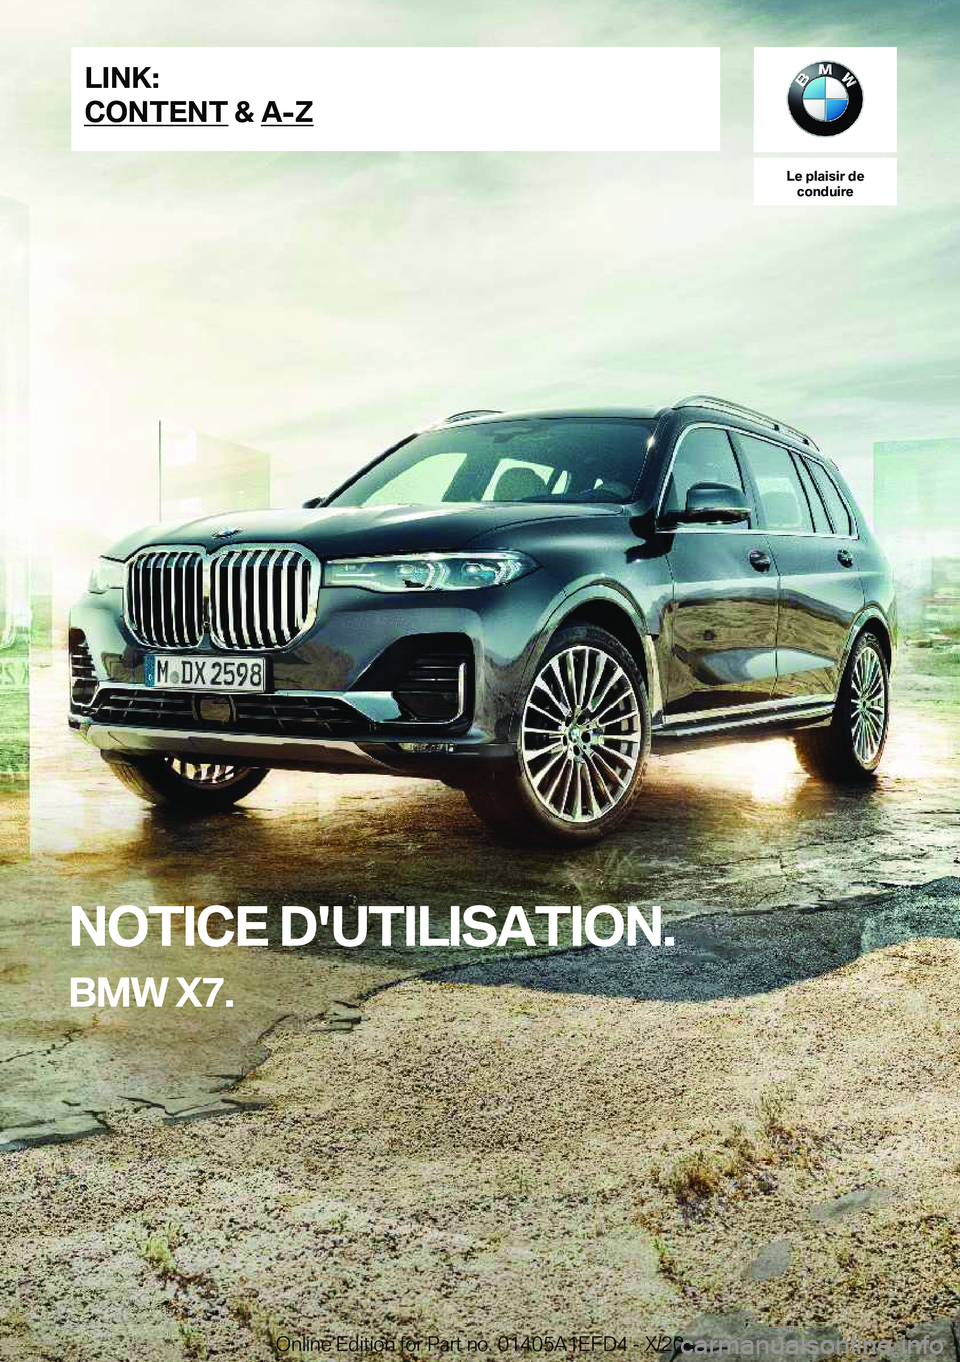 BMW X7 2021  Notices Demploi (in French) �L�e��p�l�a�i�s�i�r��d�e�c�o�n�d�u�i�r�e
�N�O�T�I�C�E��D�'�U�T�I�L�I�S�A�T�I�O�N�.
�B�M�W��X�7�.�L�I�N�K�:
�C�O�N�T�E�N�T��&��A�-�Z�O�n�l�i�n�e��E�d�i�t�i�o�n��f�o�r��P�a�r�t��n�o�.��0�